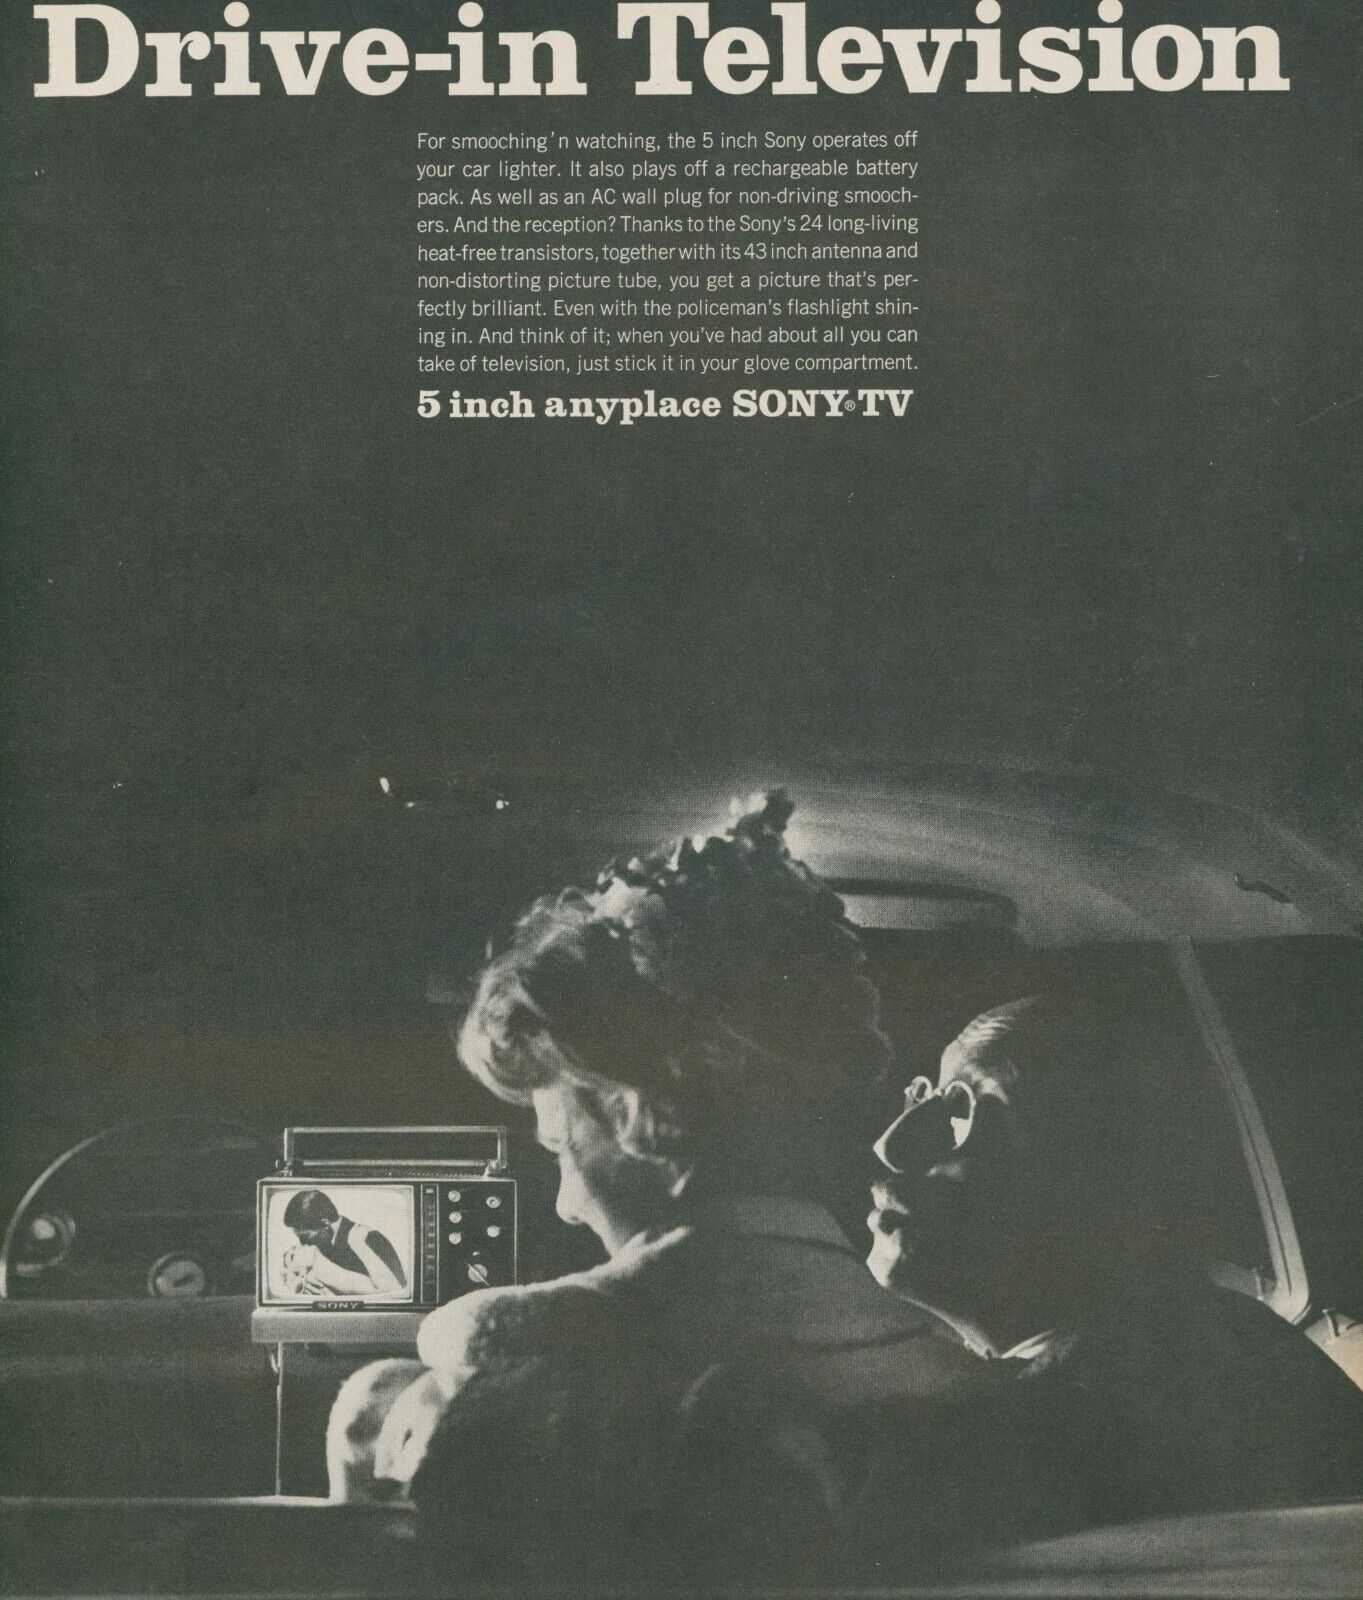 1966 Sony Television 5 Inch Anyplace Car TV On Couple Kiss Vintage Print Ad L8